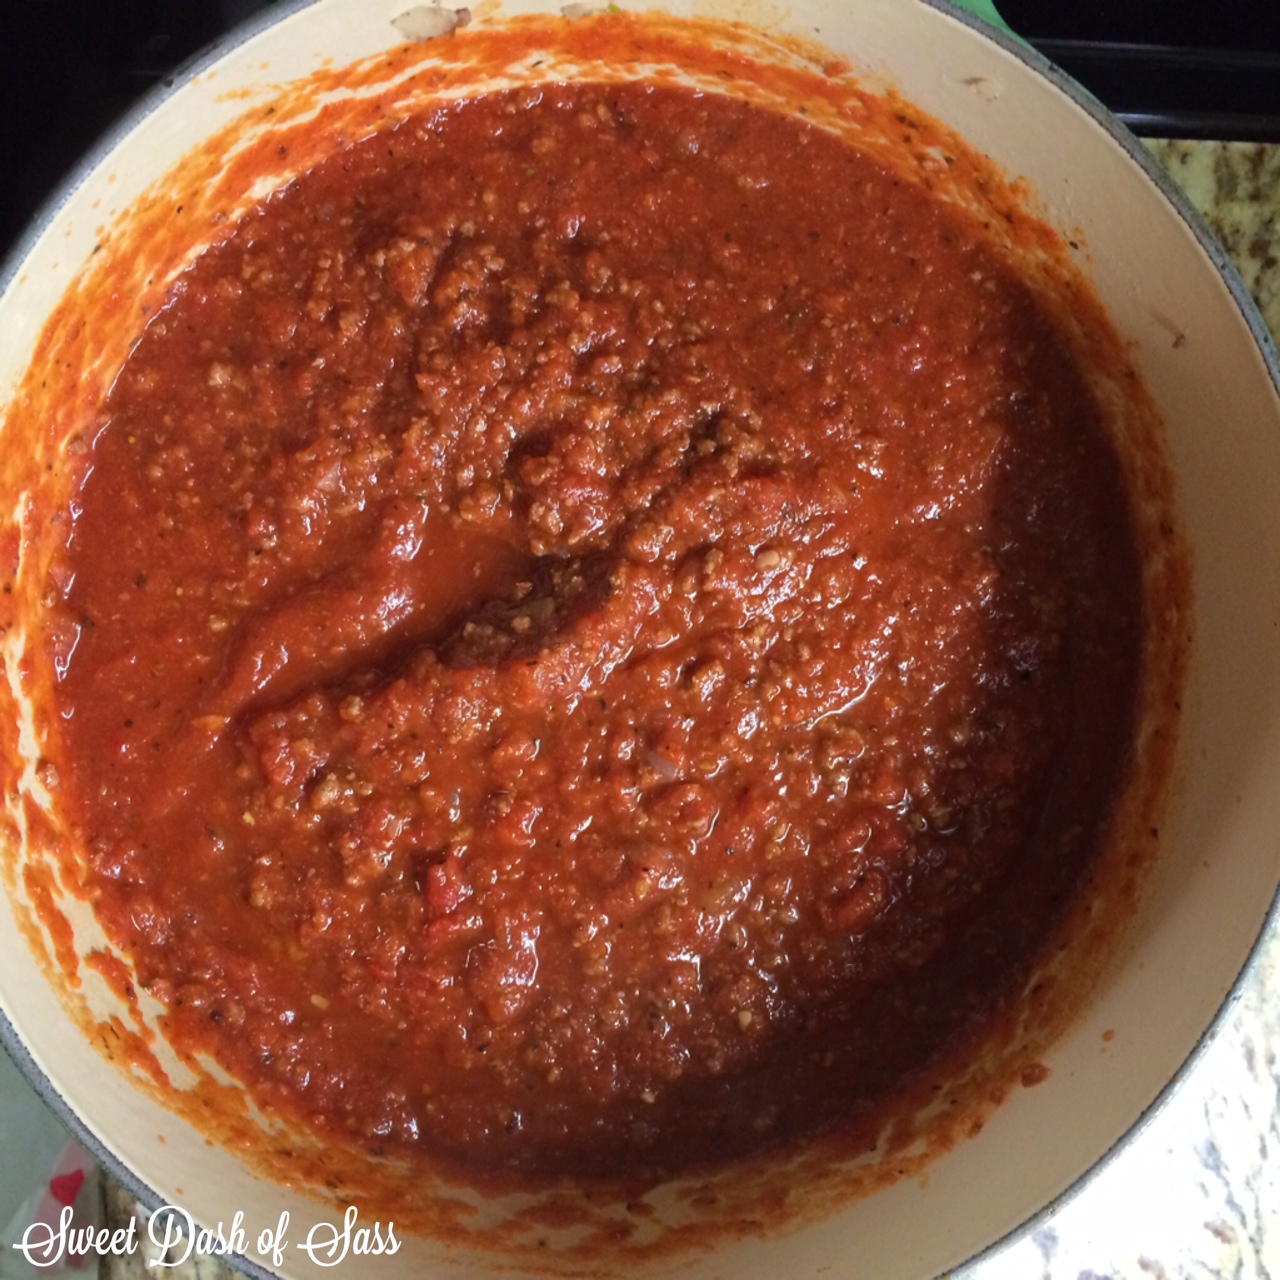 Best Tasting Homemade Spaghetti Sauce - Seriously best ever!  Will make this again!  www.SweetDashofSass.com